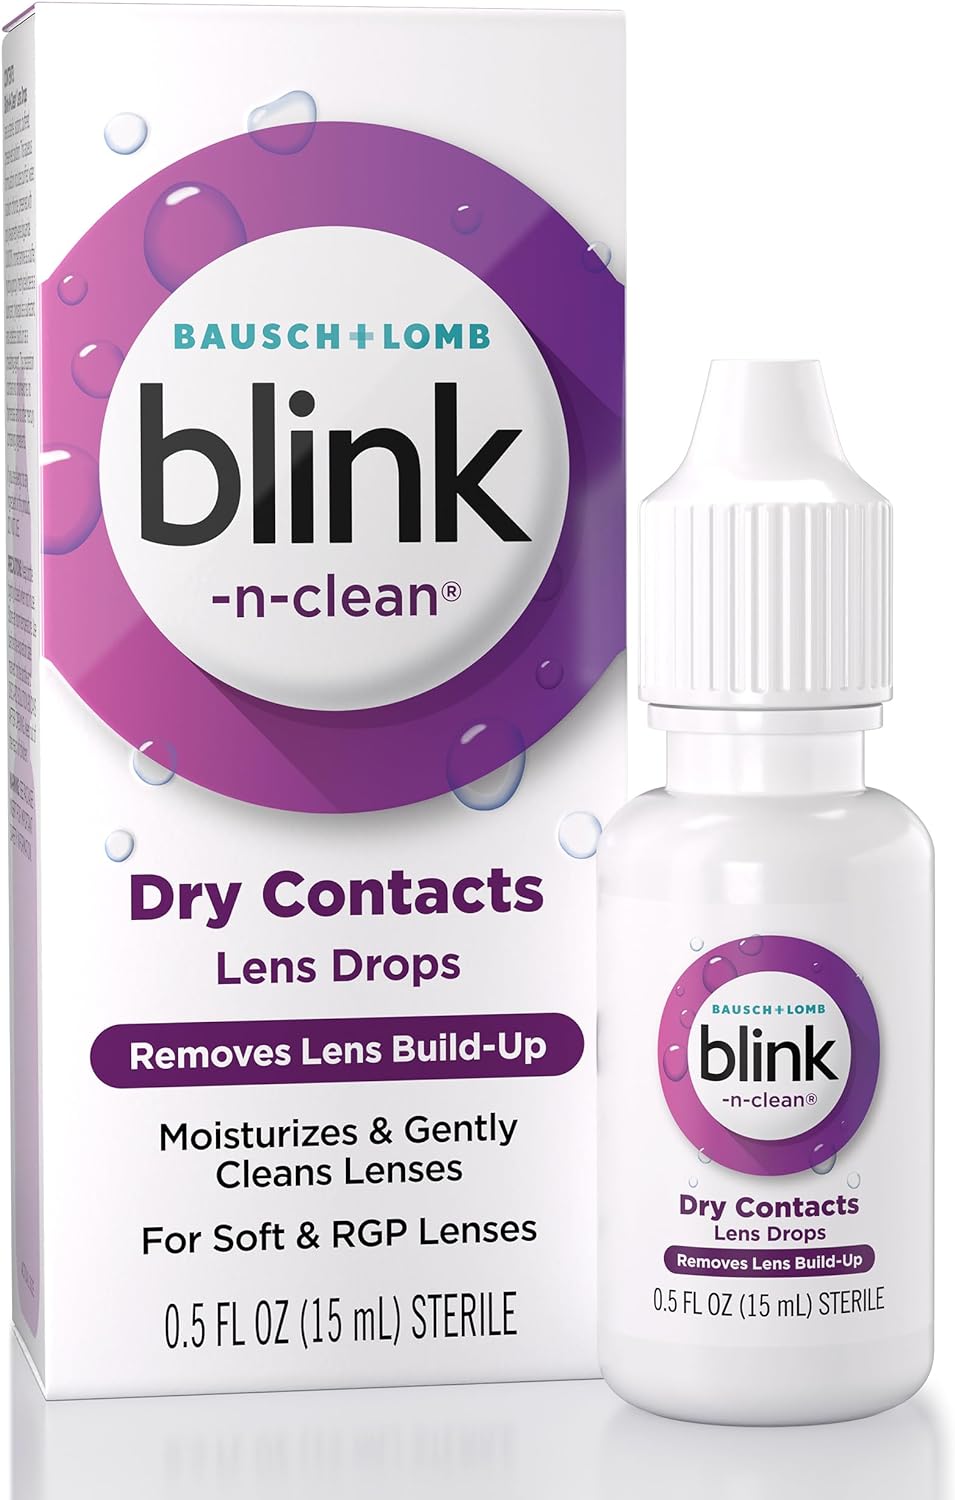 Really love these drops! When my contacts get dry, it feels like there' a scum over them and they bother me to the point where I'd have to remove them, regular drops didn't help. These are like windshield cleaners! Works instantly, clears vision, cools itchy, sticky eyes and a great deal!